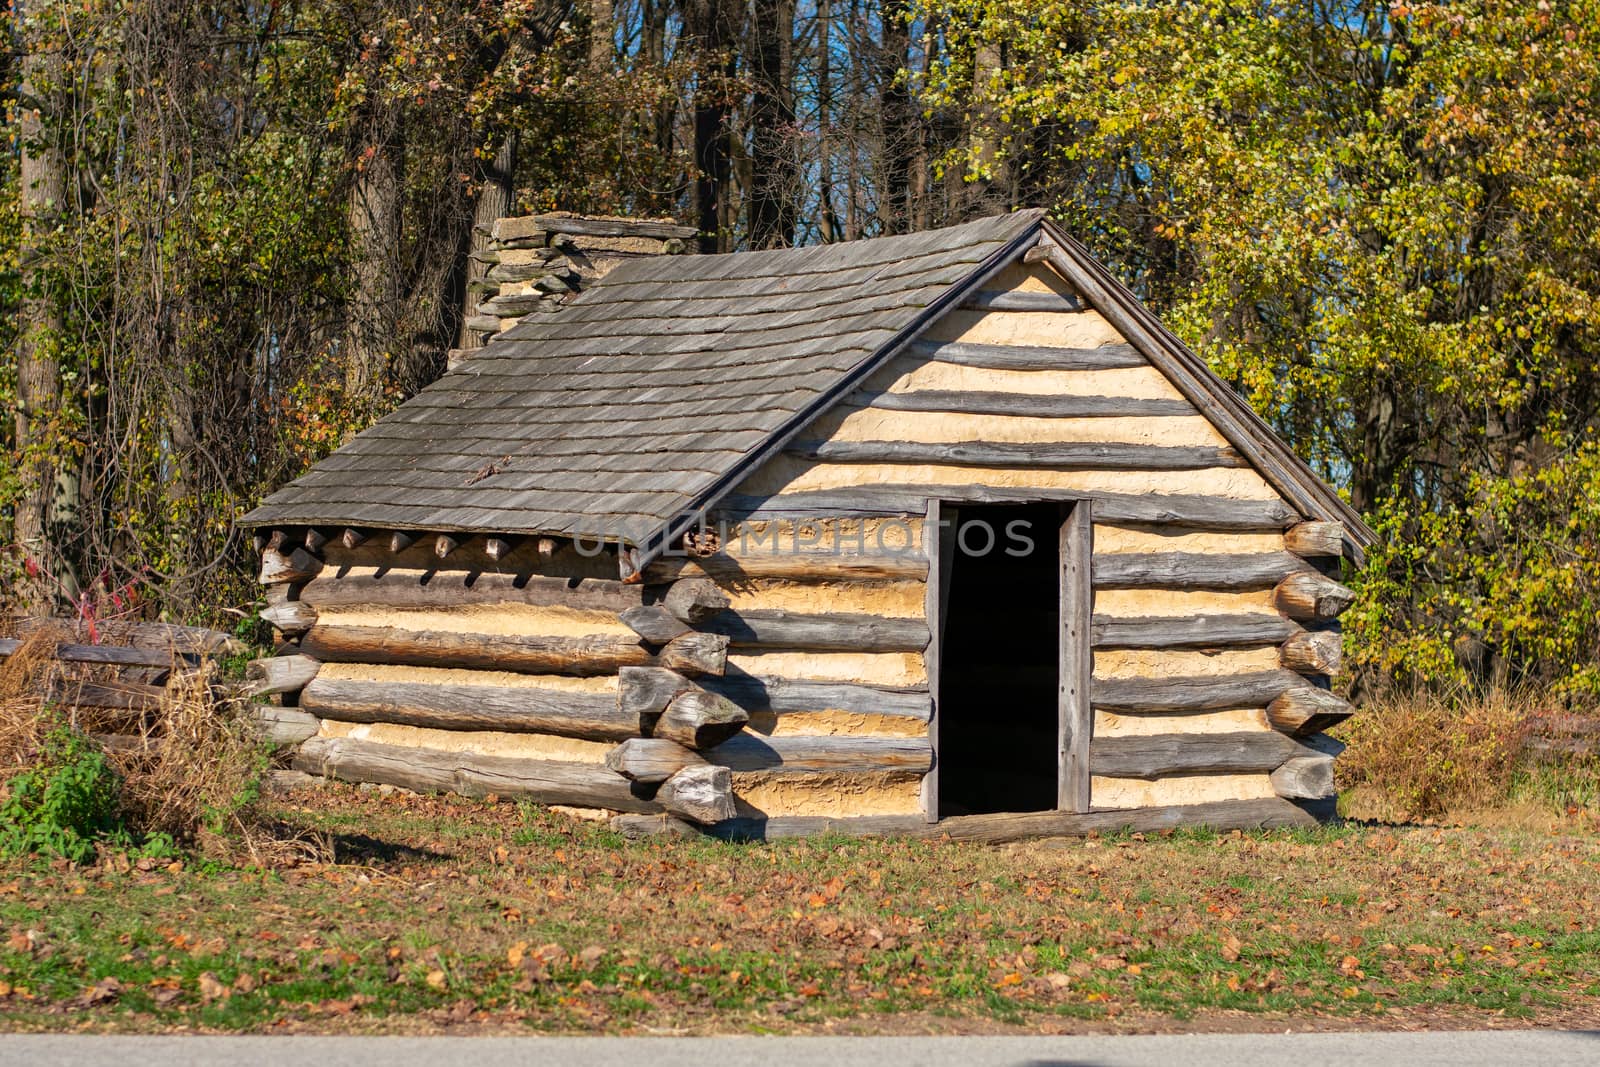 A Reproduction Log Cabin at Valley Forge National Historical Park